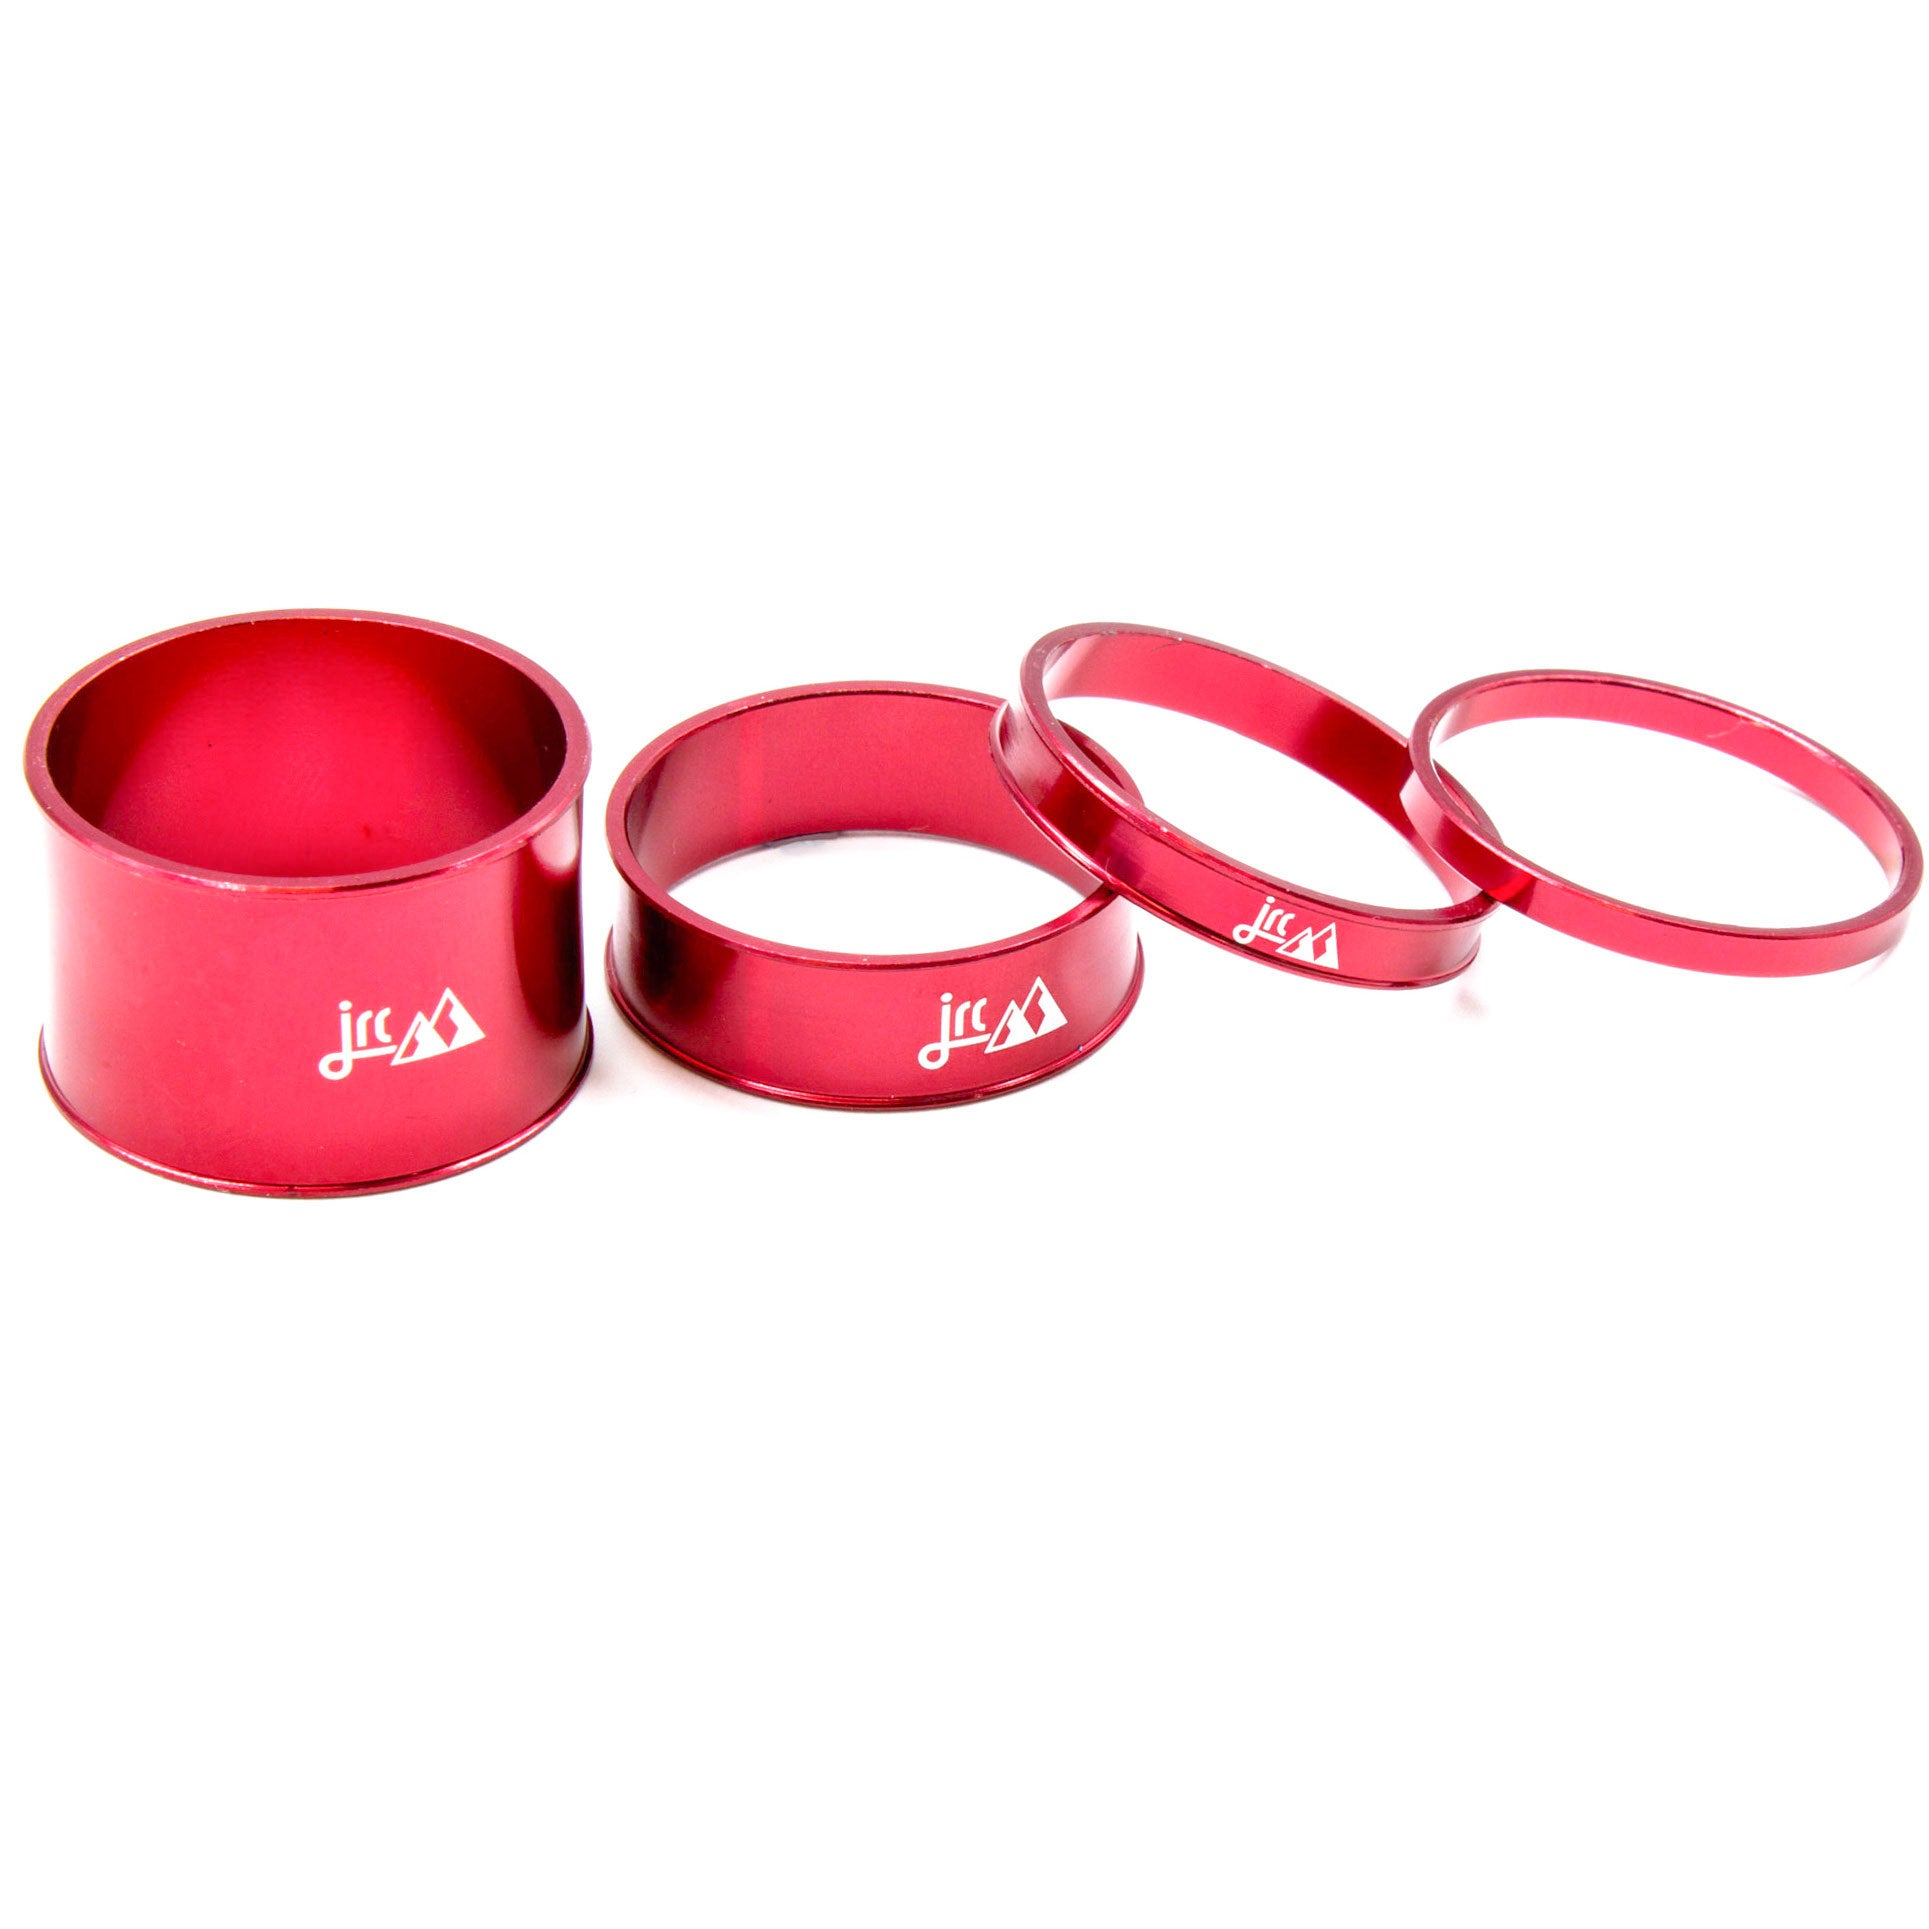 Red, lightweight aluminium bicycle headset spacer kit with 4 sizes.